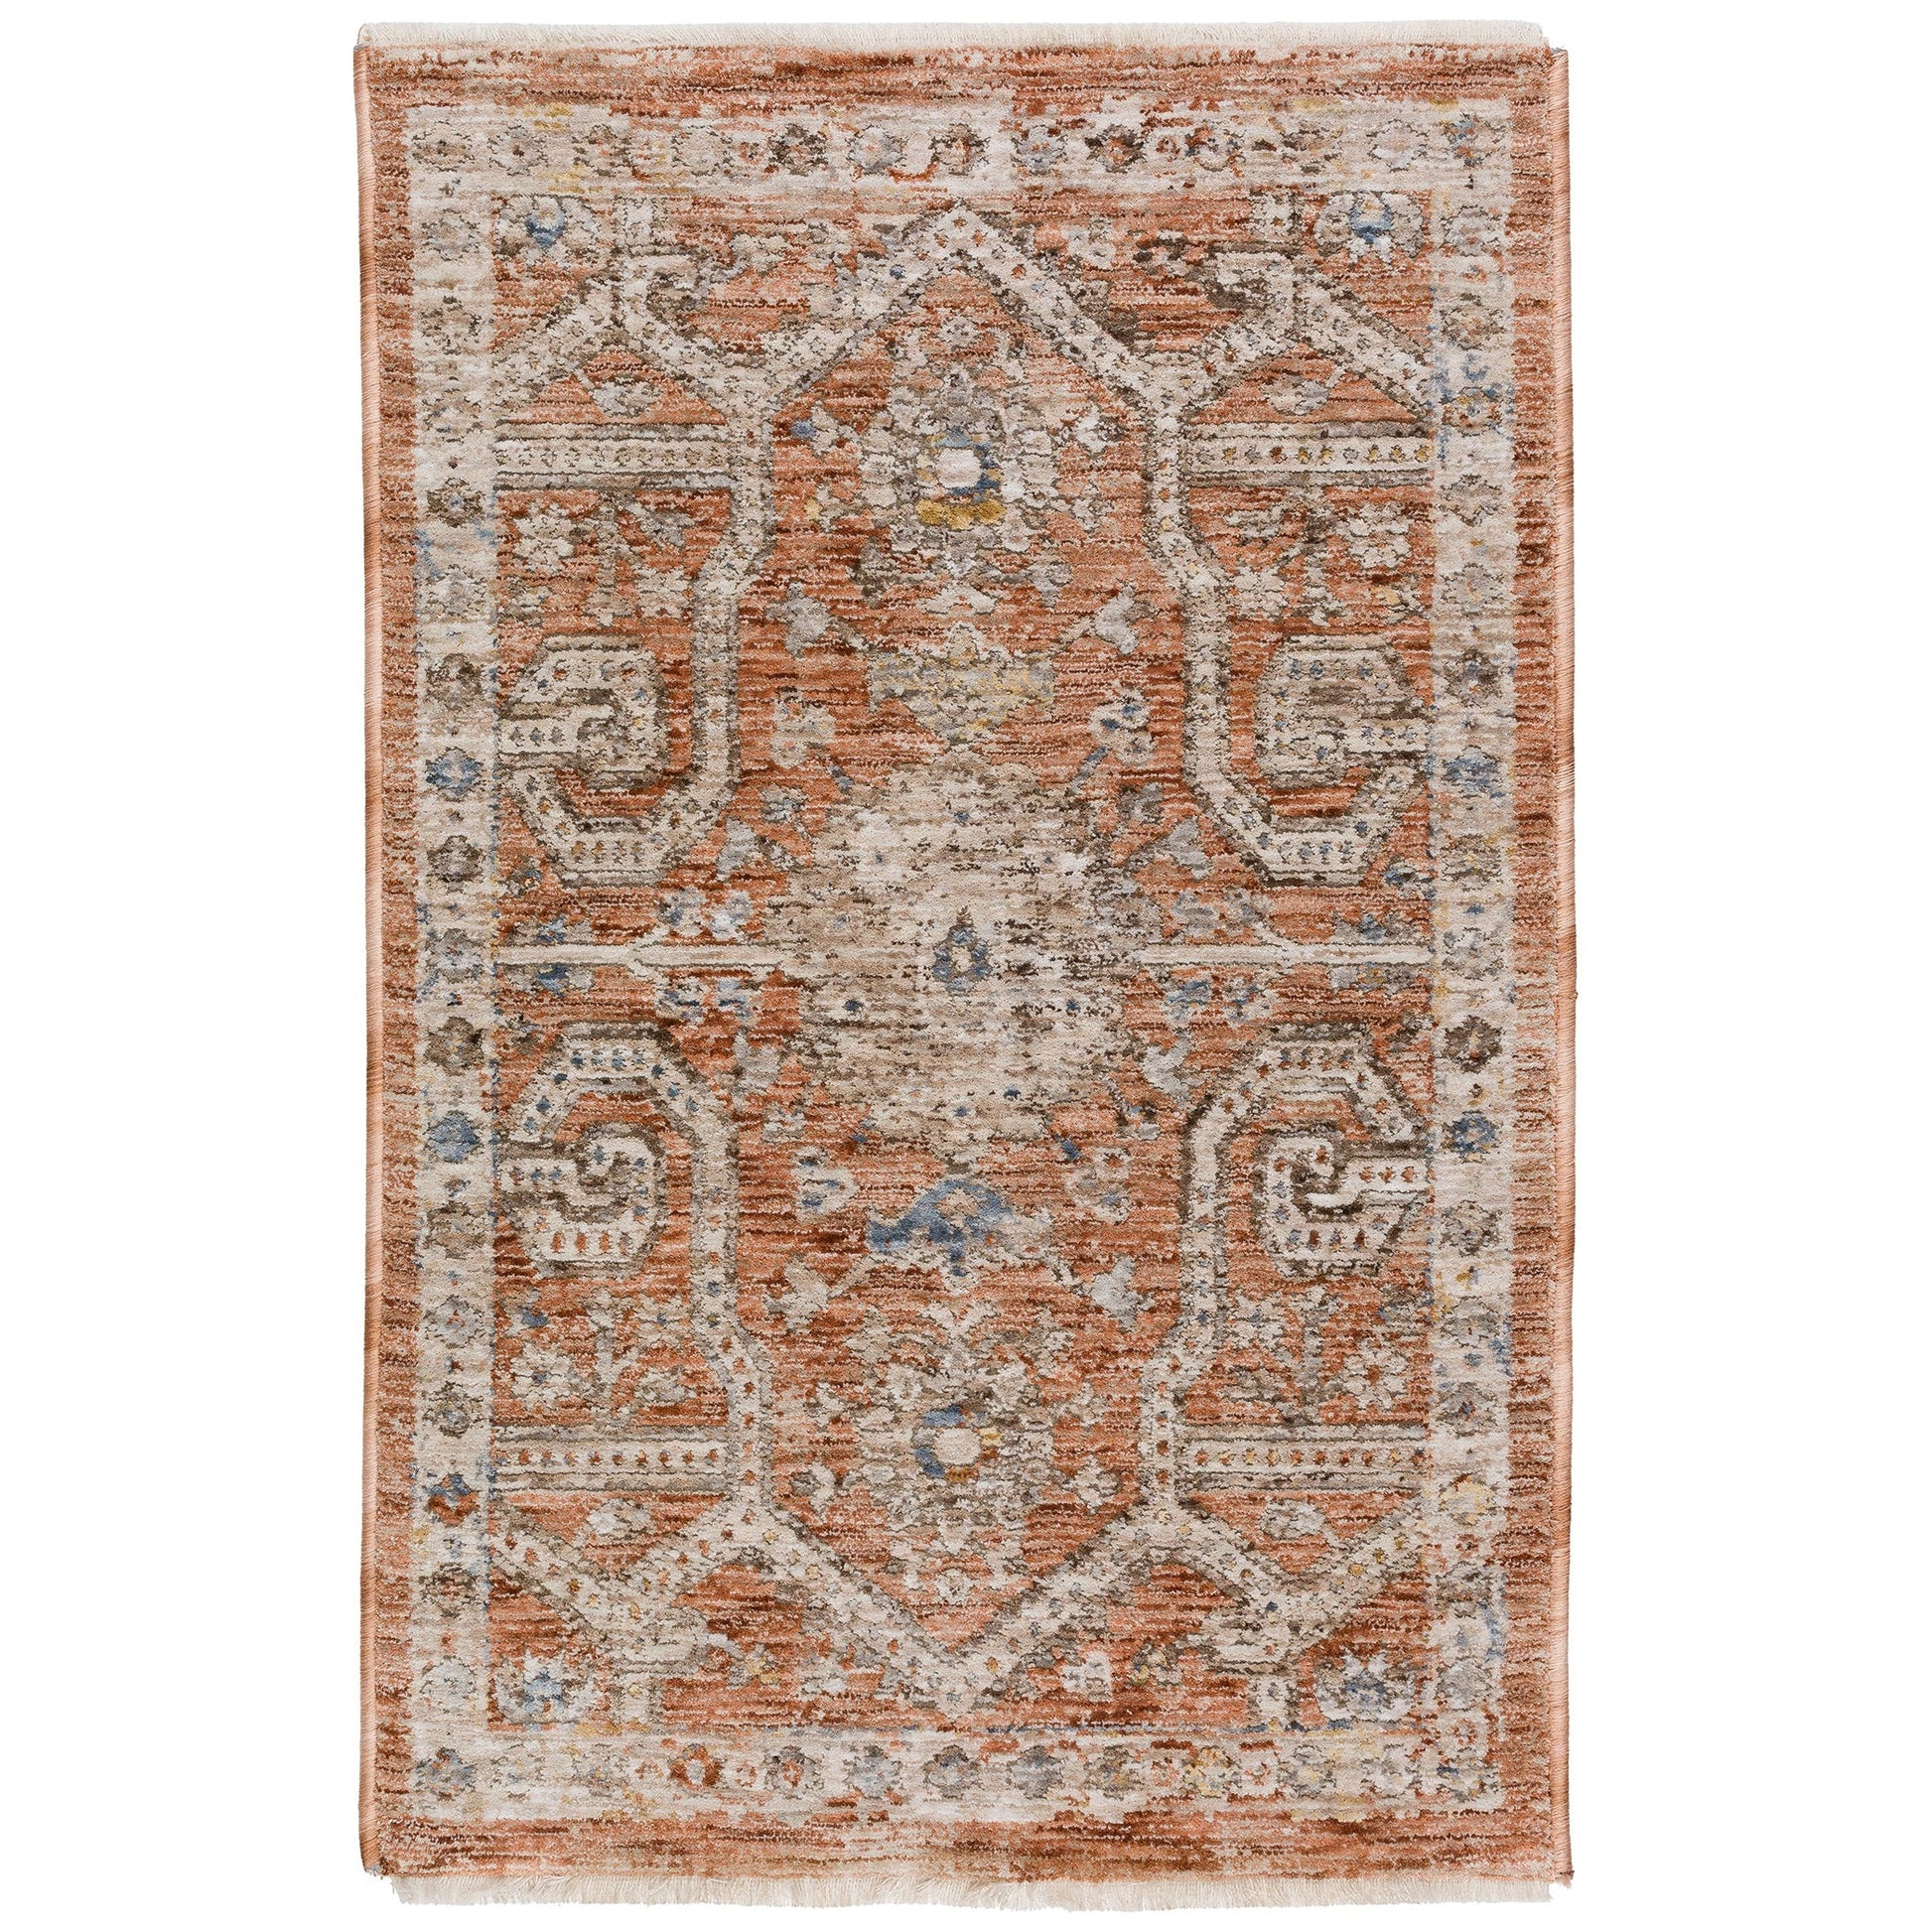 Dalyn Rugs Vienna VI1 Spice Traditional Power Woven Rug